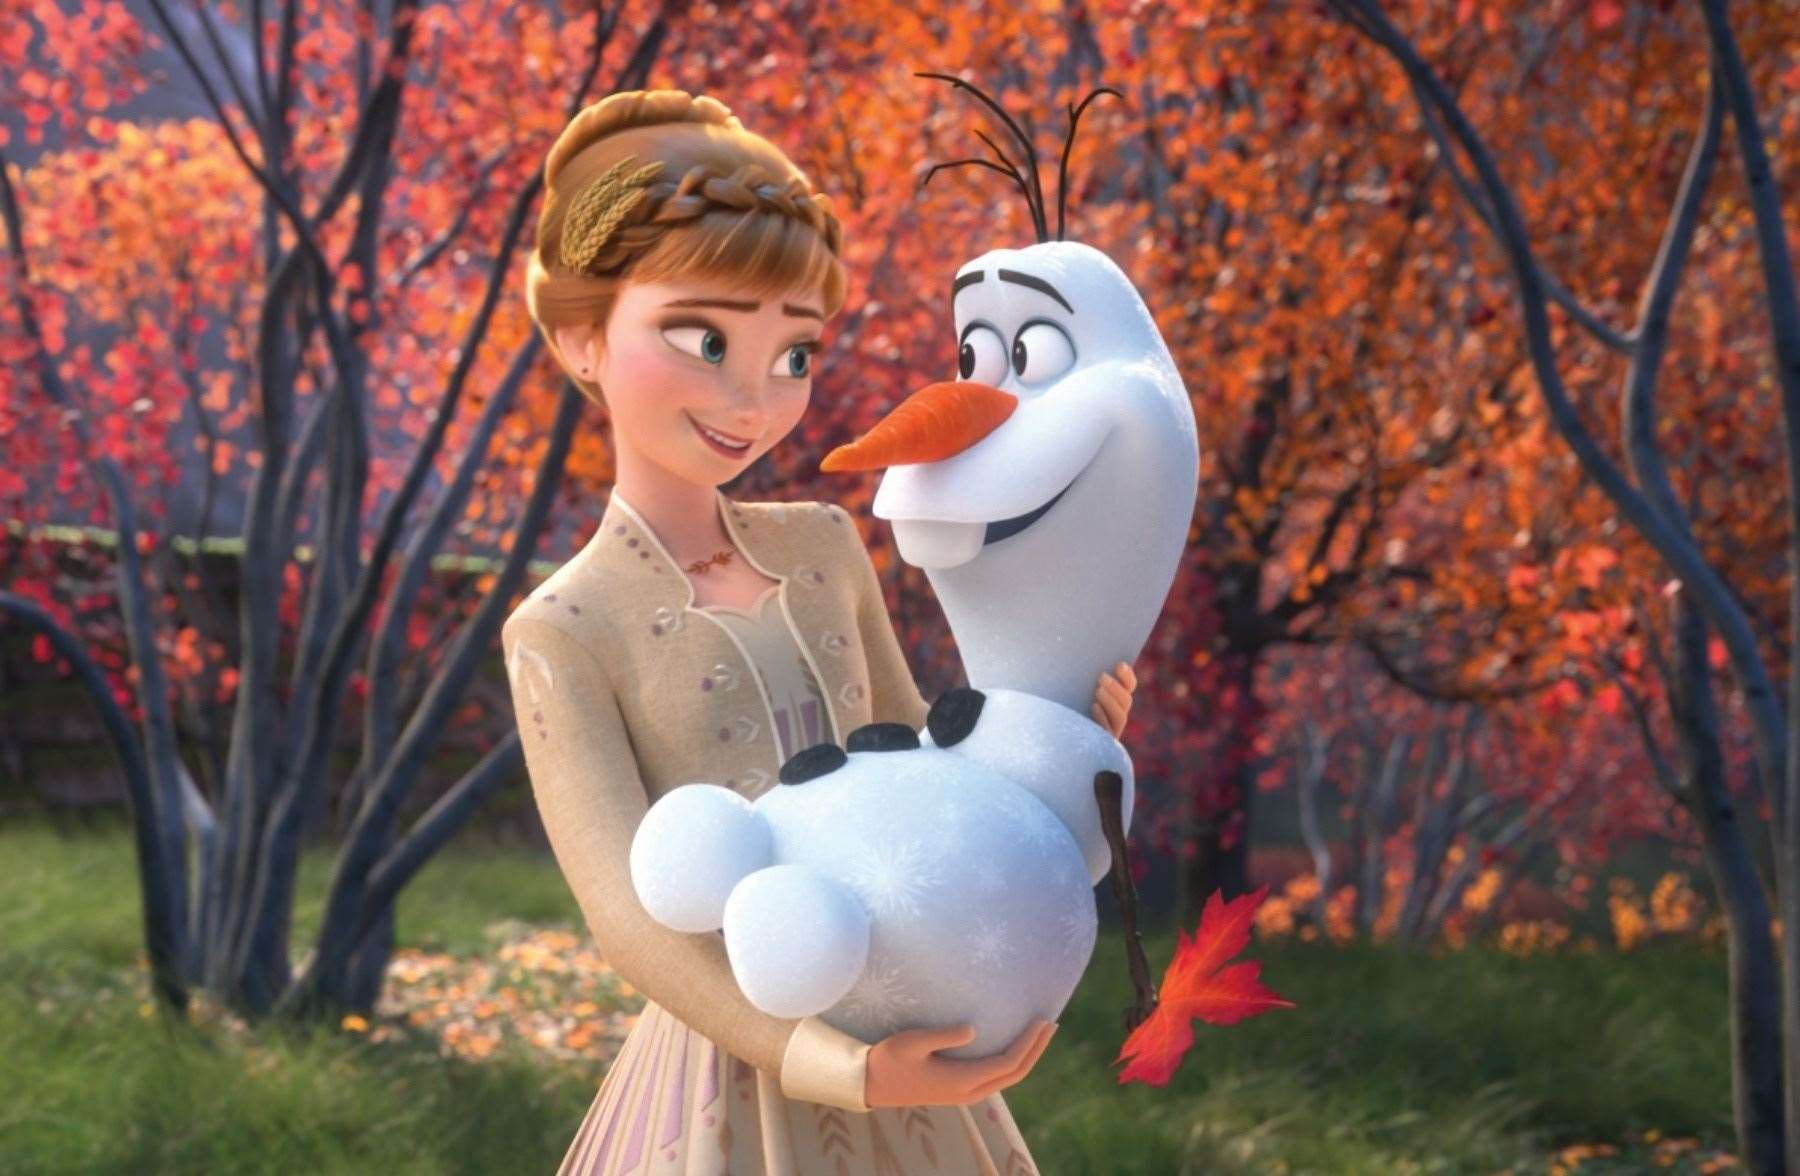 Frozen 2 is expected to be added to the streaming service later this year. © 2019 Disney. All Rights Reserved.. (24571511)